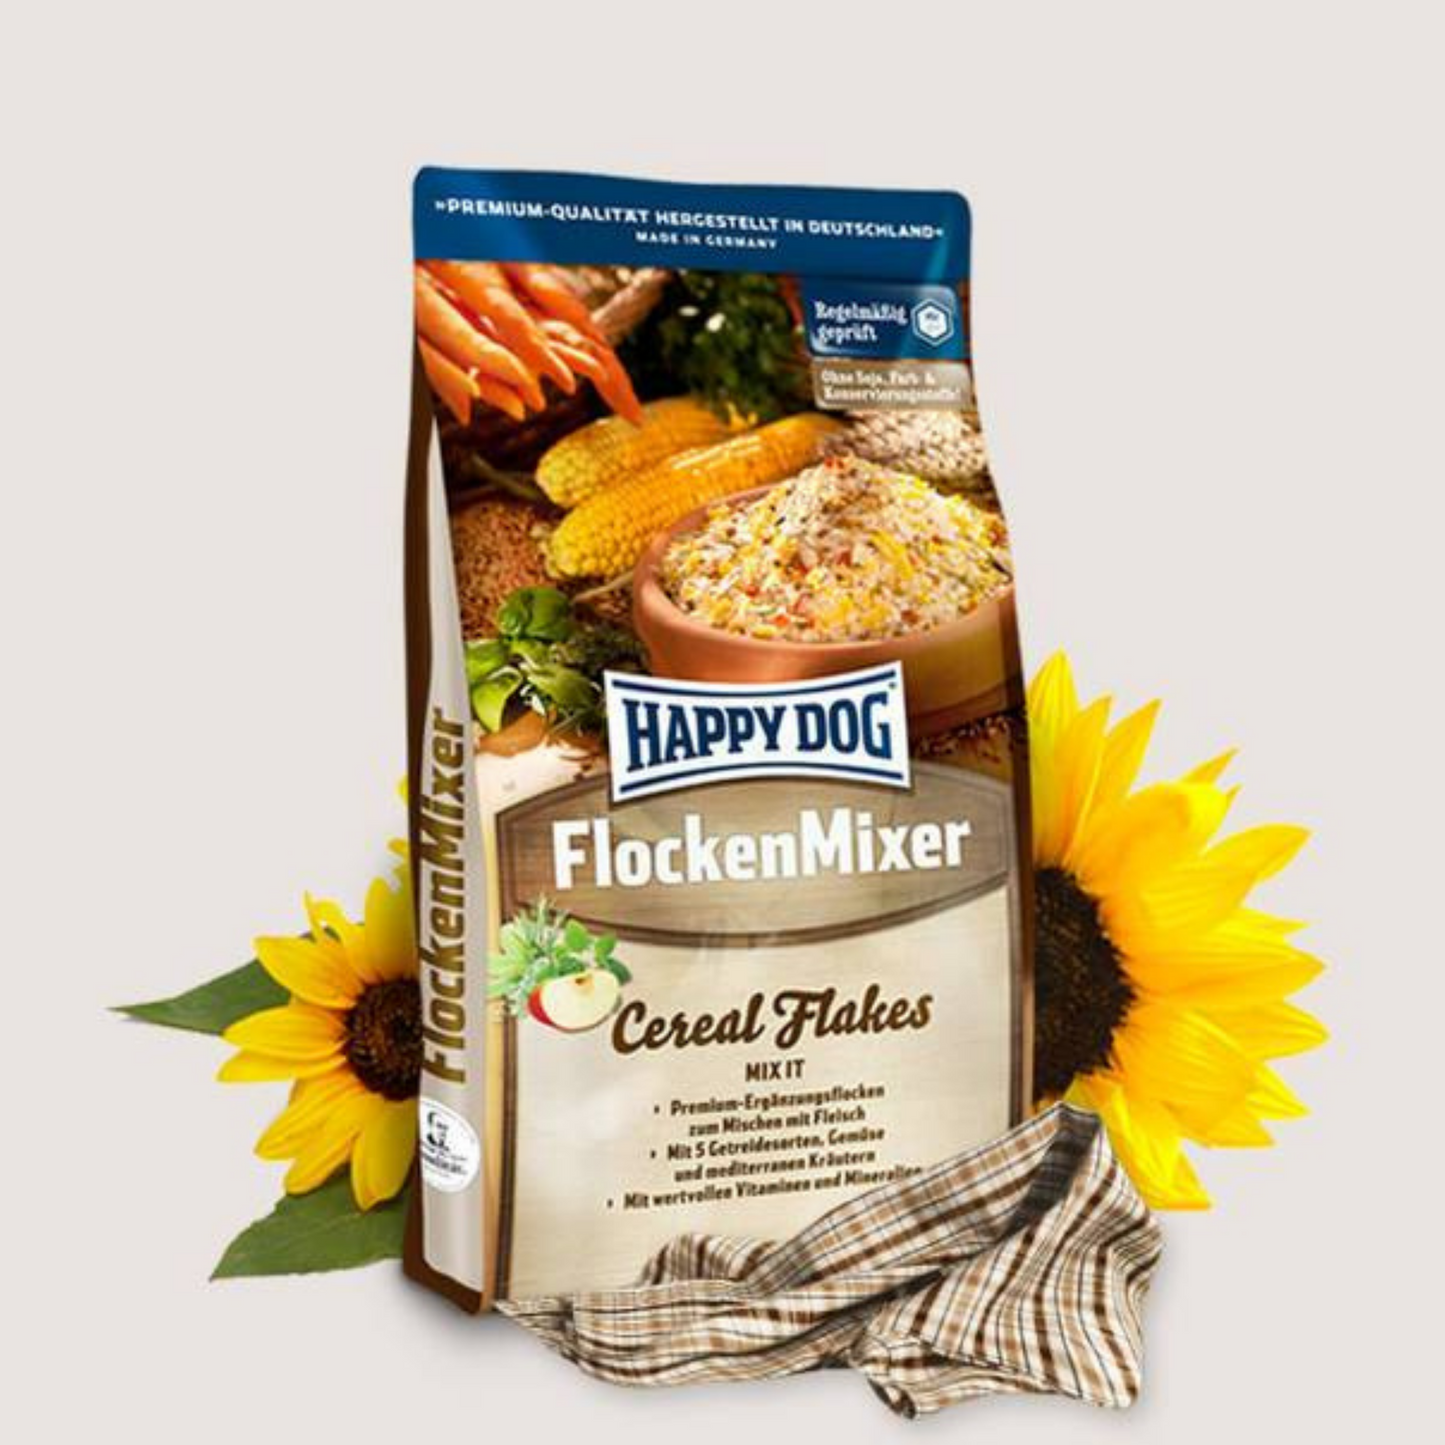 Happy Dog Cereal Flakes